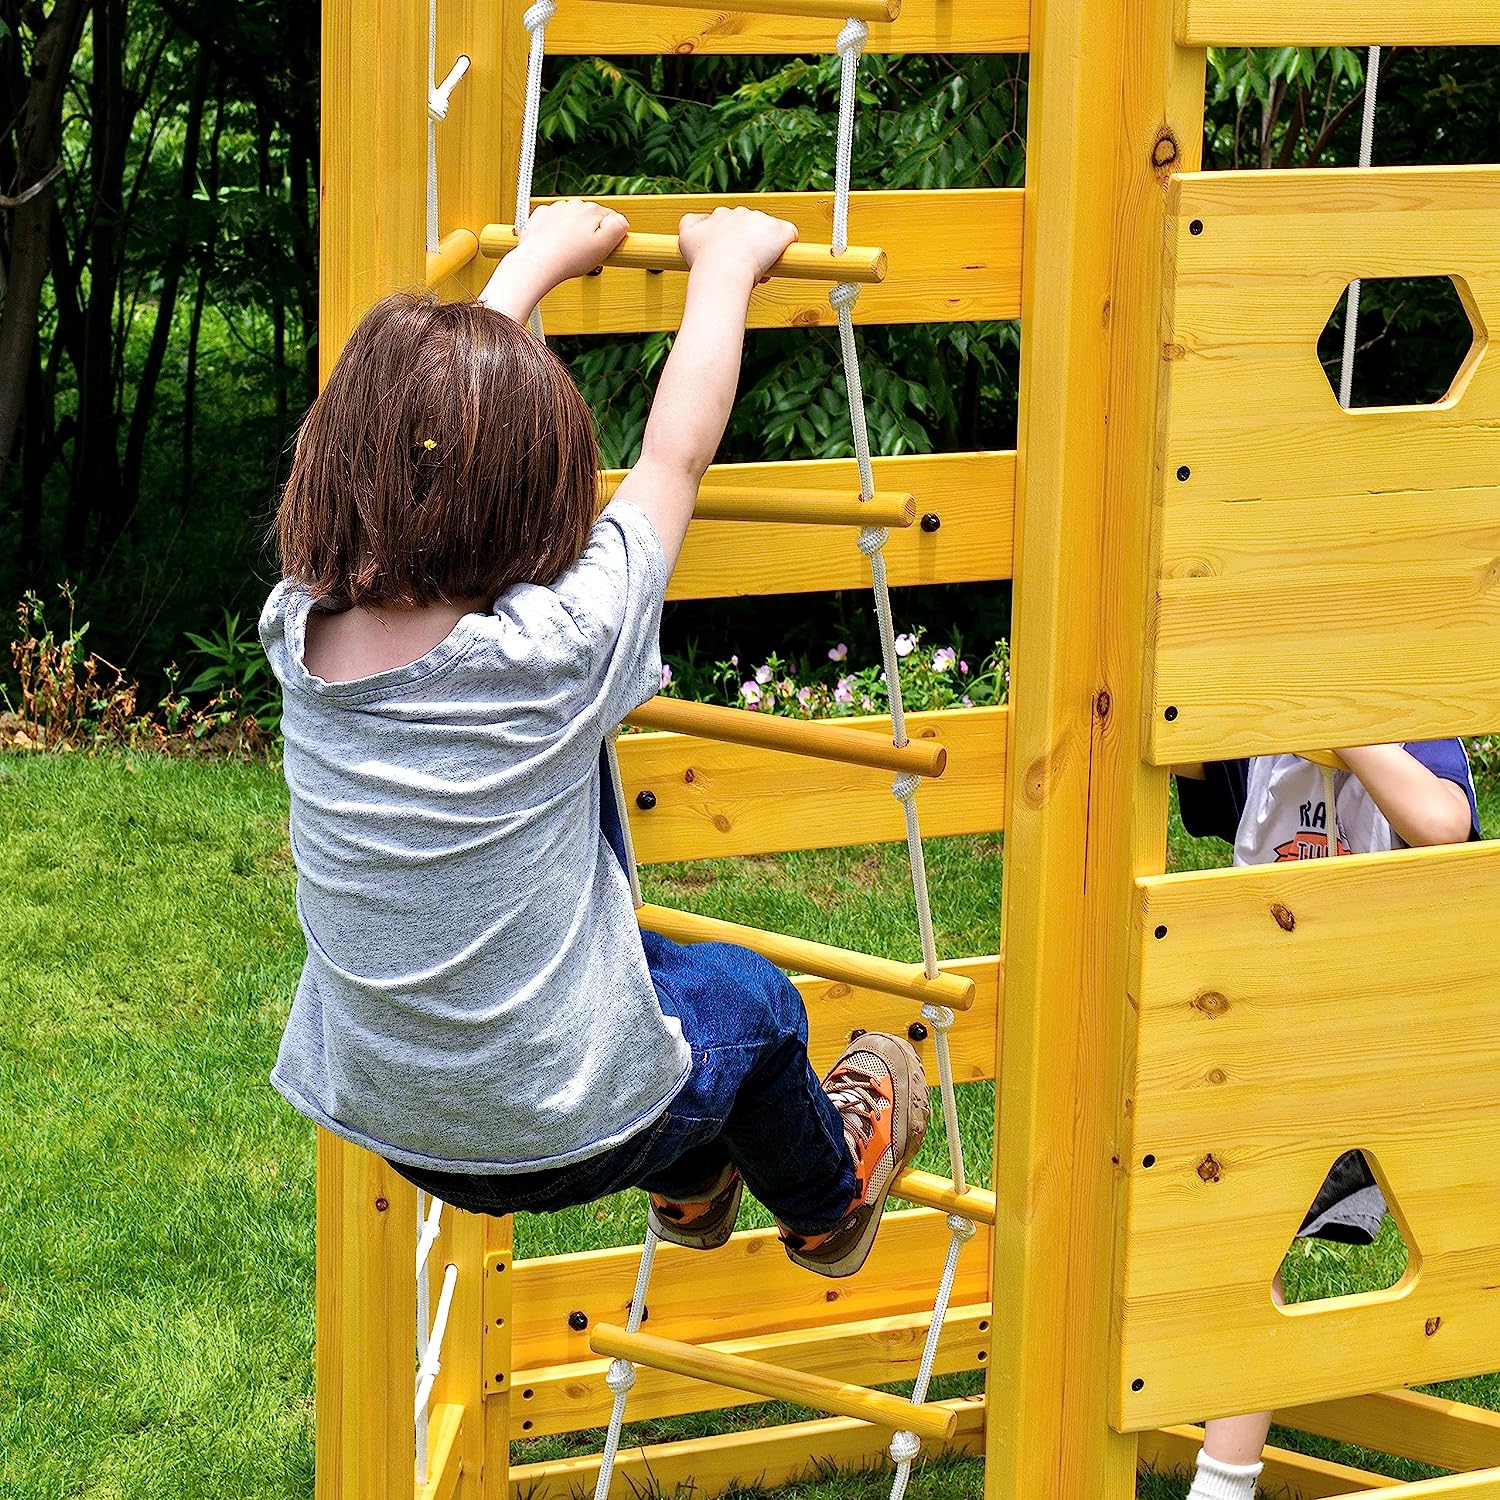 Hawthorn - Outdoor Climber with Monkey Bars, Swing, and Octagon Climber Playset